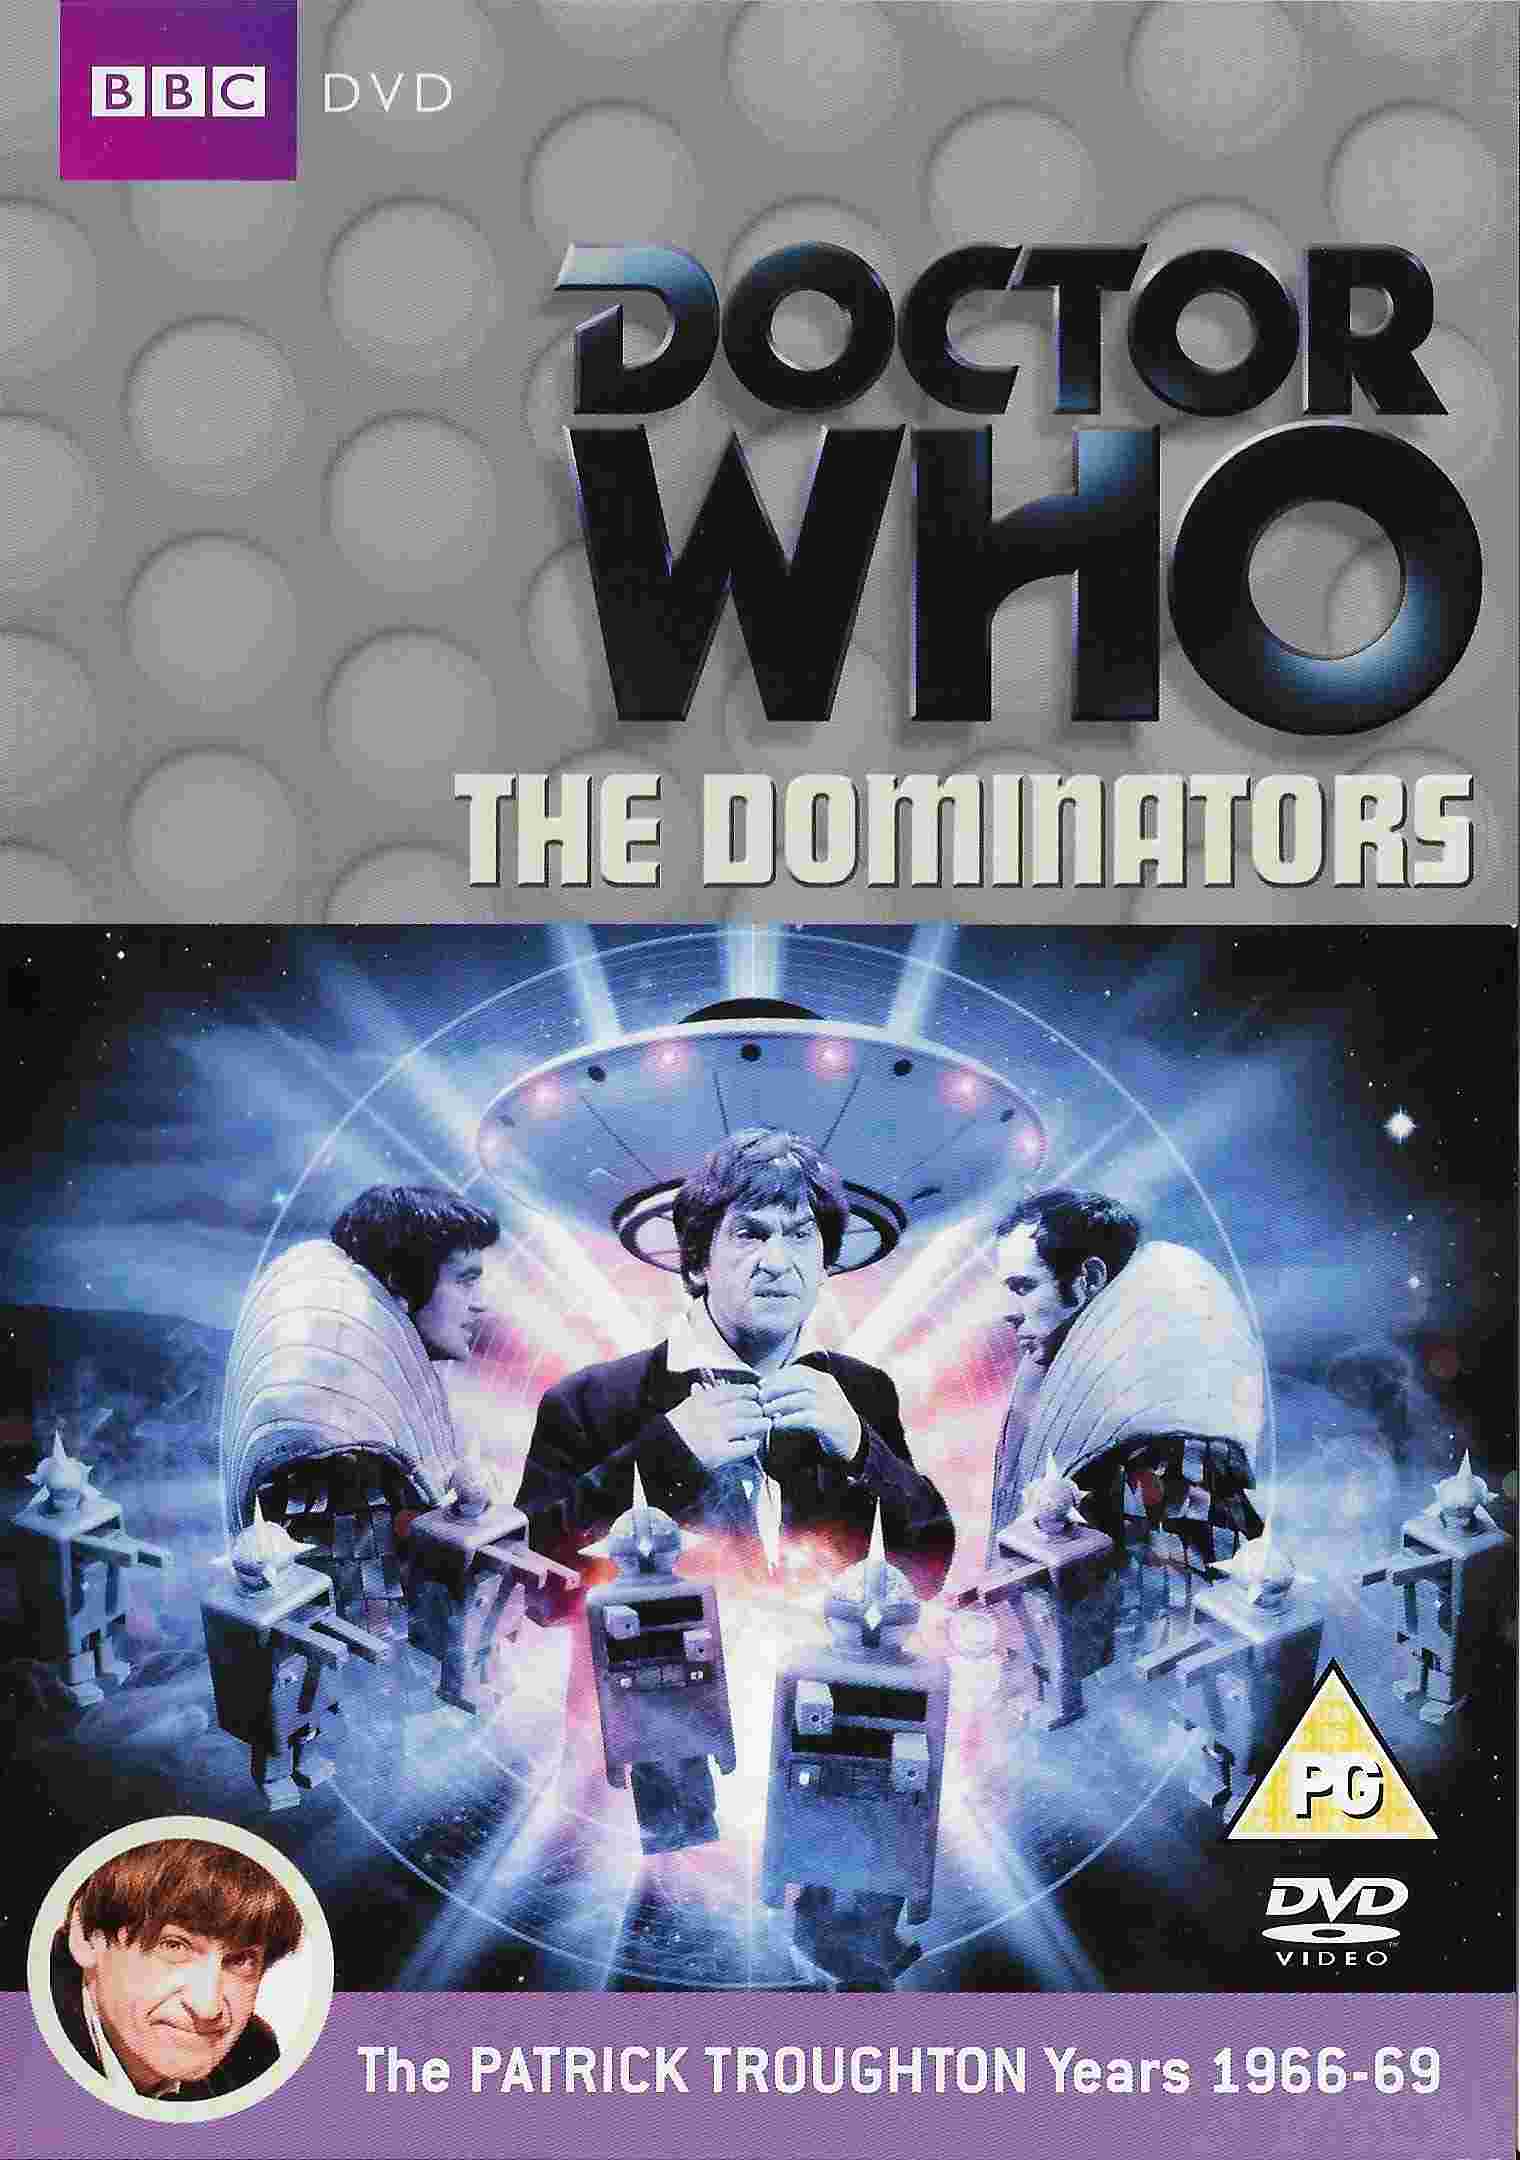 Picture of BBCDVD 2807 Doctor Who - The Dominators by artist Norman Ashby from the BBC dvds - Records and Tapes library